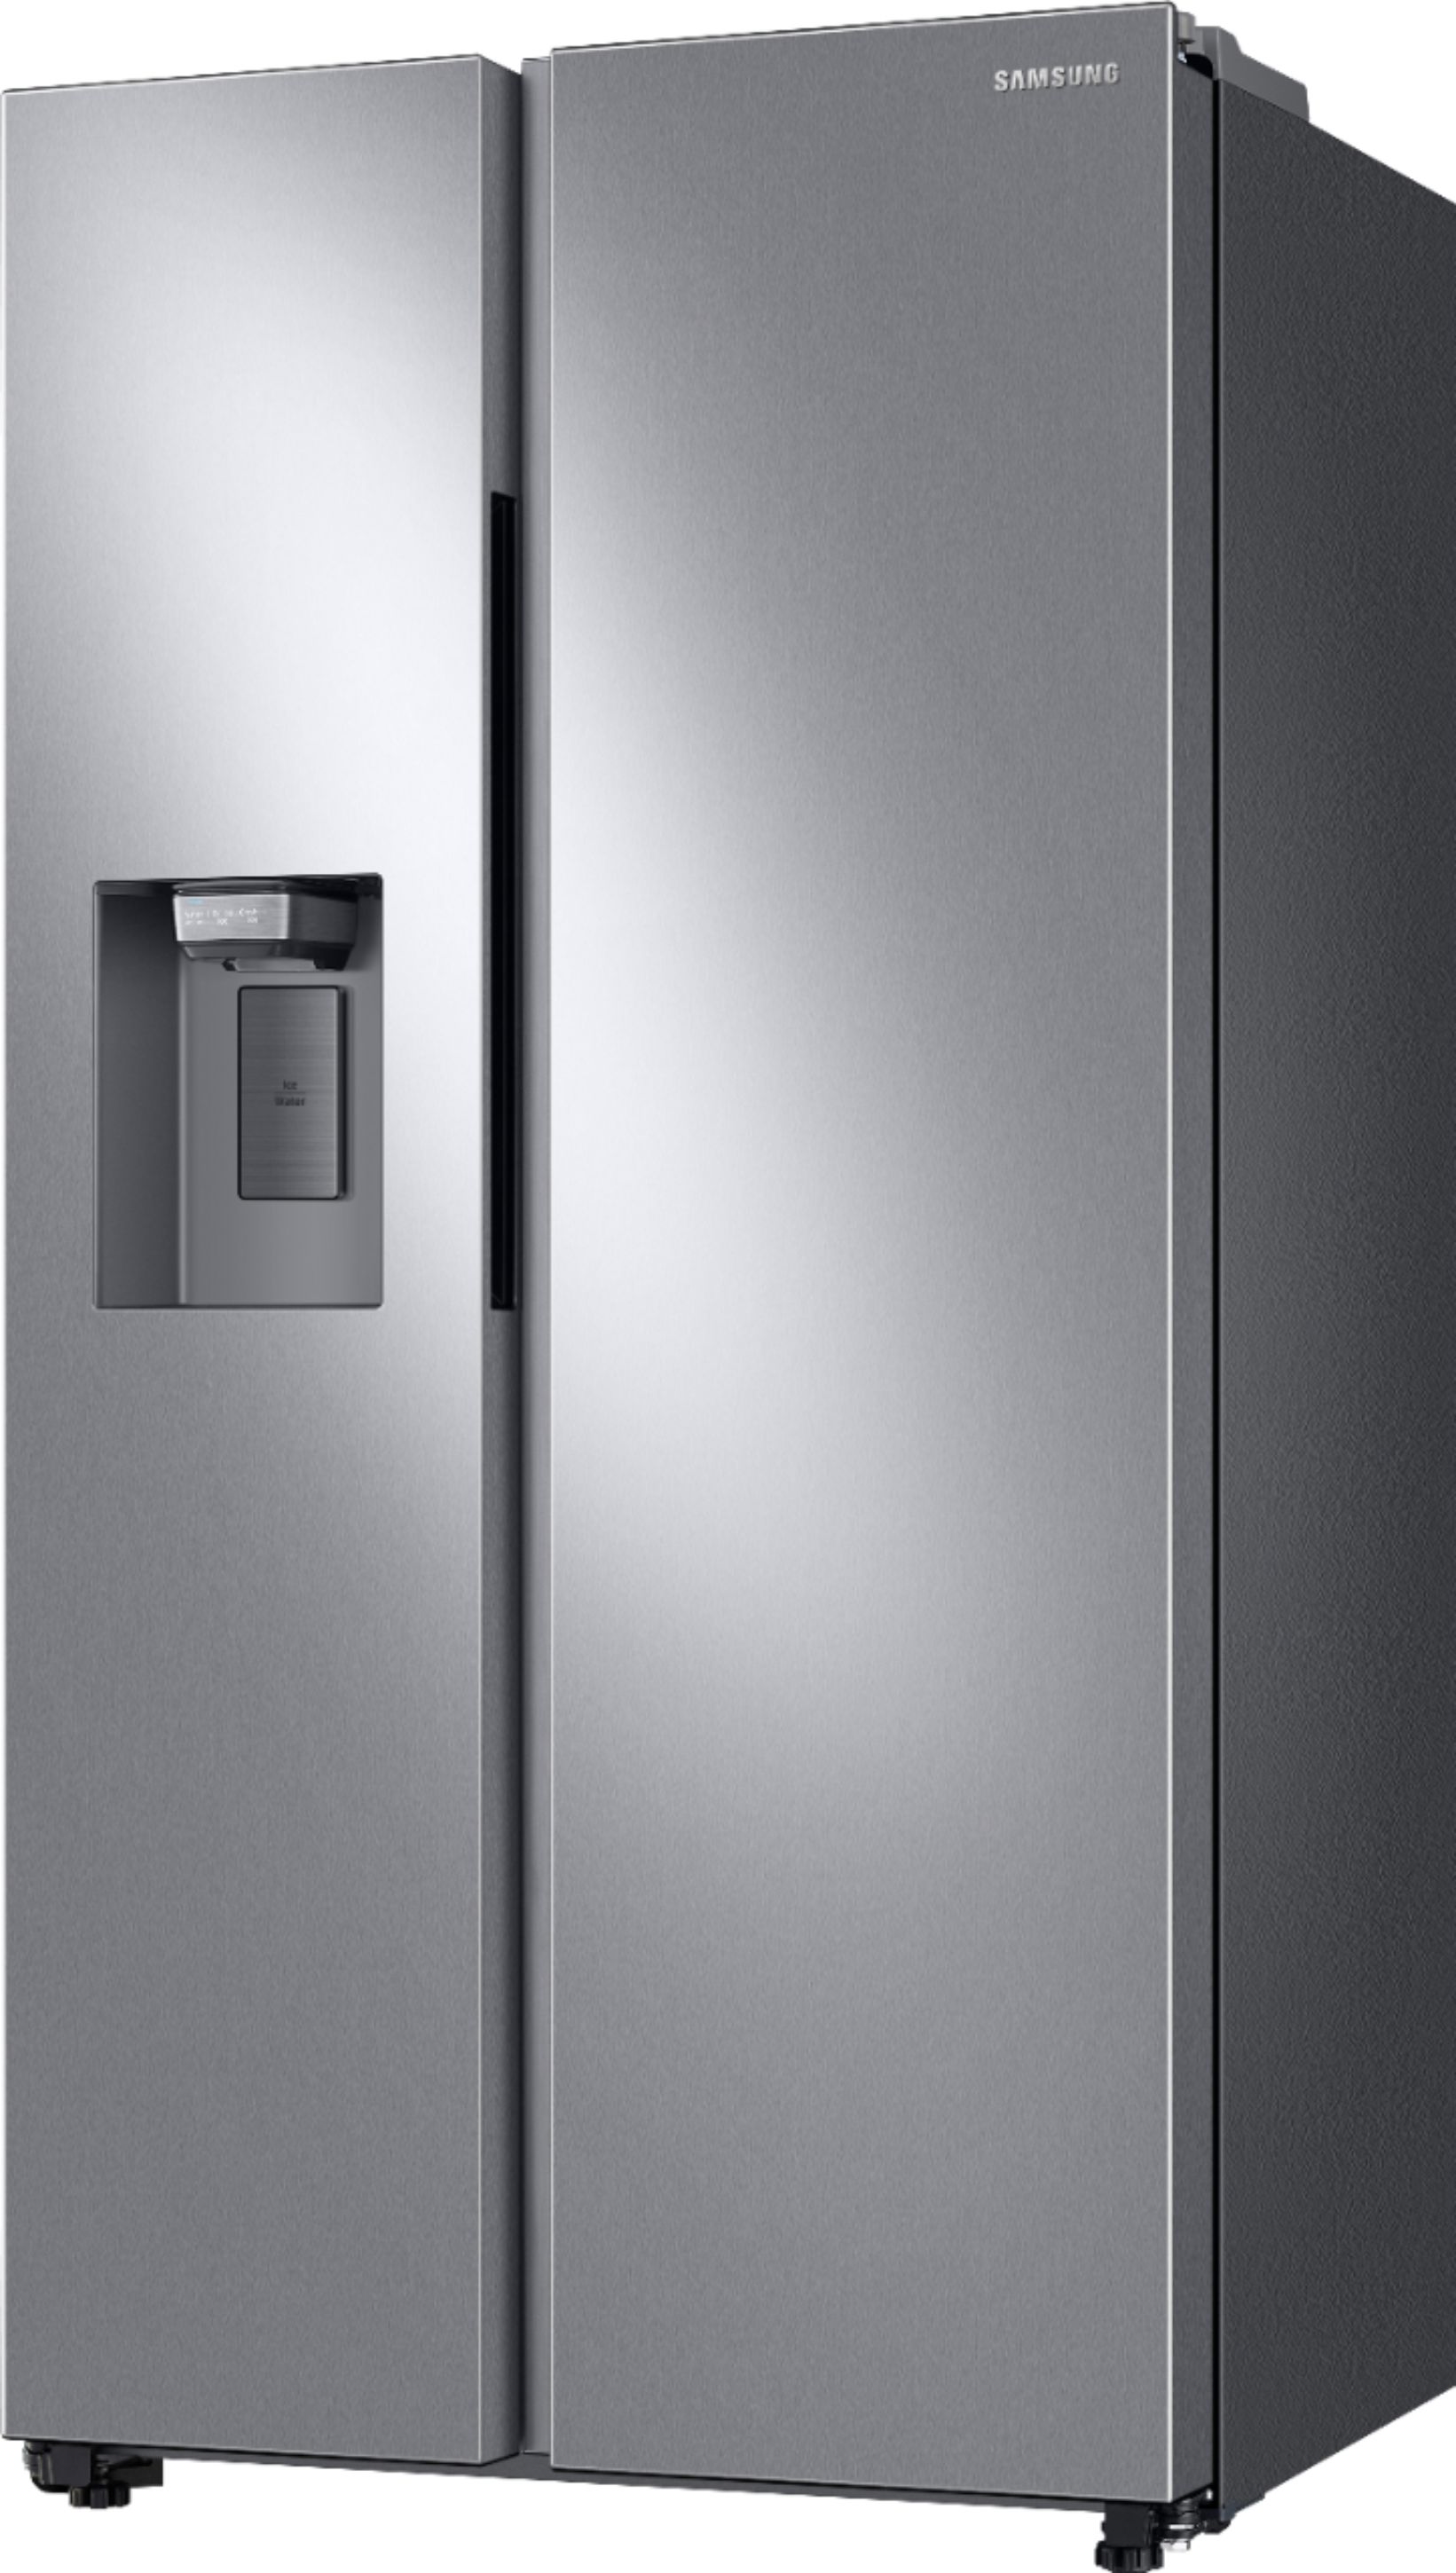 Left View: Samsung - 25.1 Cu. Ft. French Door Refrigerator with Family Hub - Stainless steel